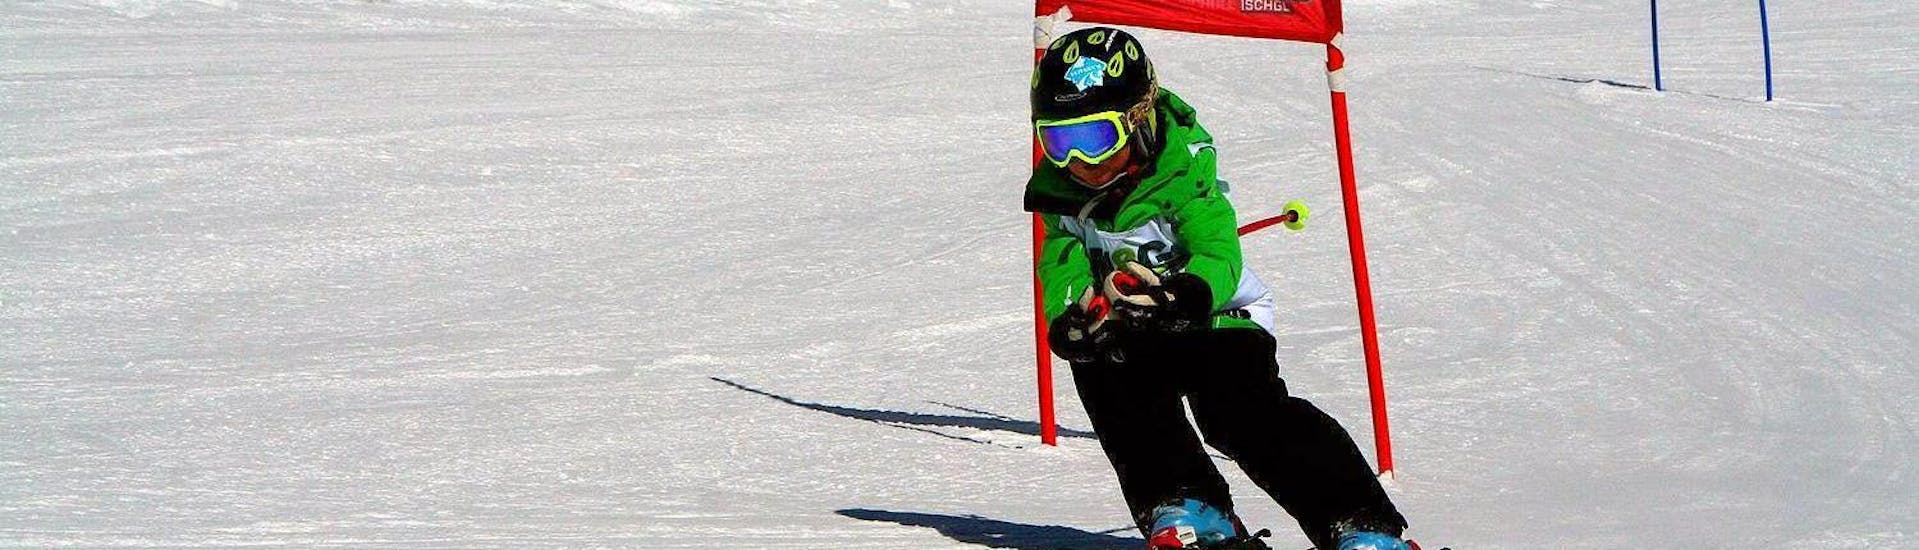 A young child is speeding down a race track during one of their Kids Ski Lessons (6-15 years) - Advanced in the ski resort of Ischgl.